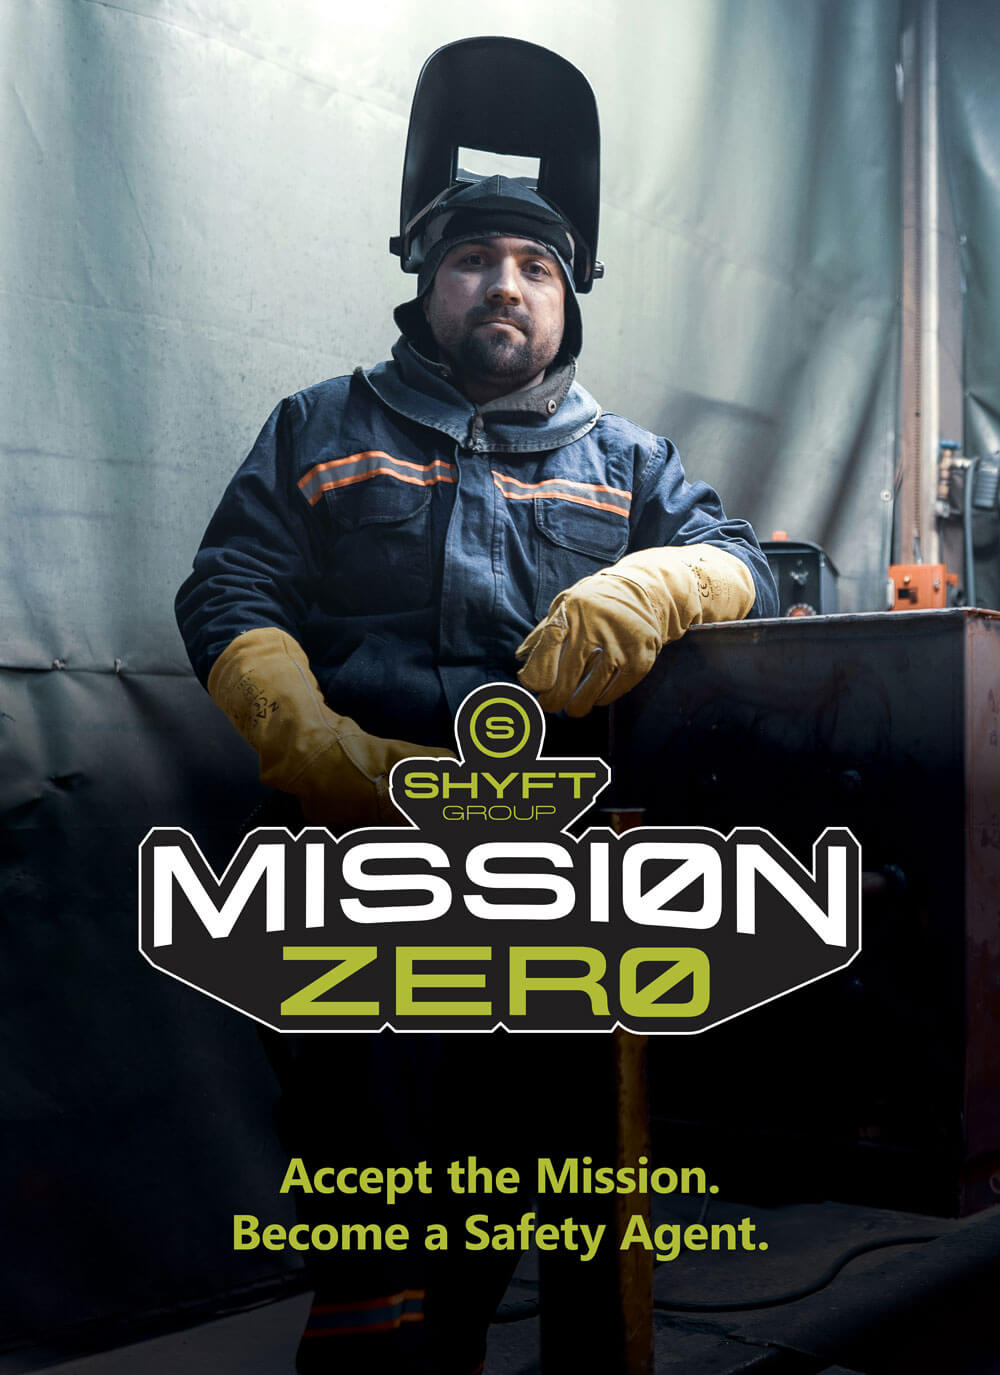 muted color poster of fireman for mission zero safety campaign by The Shyft Group